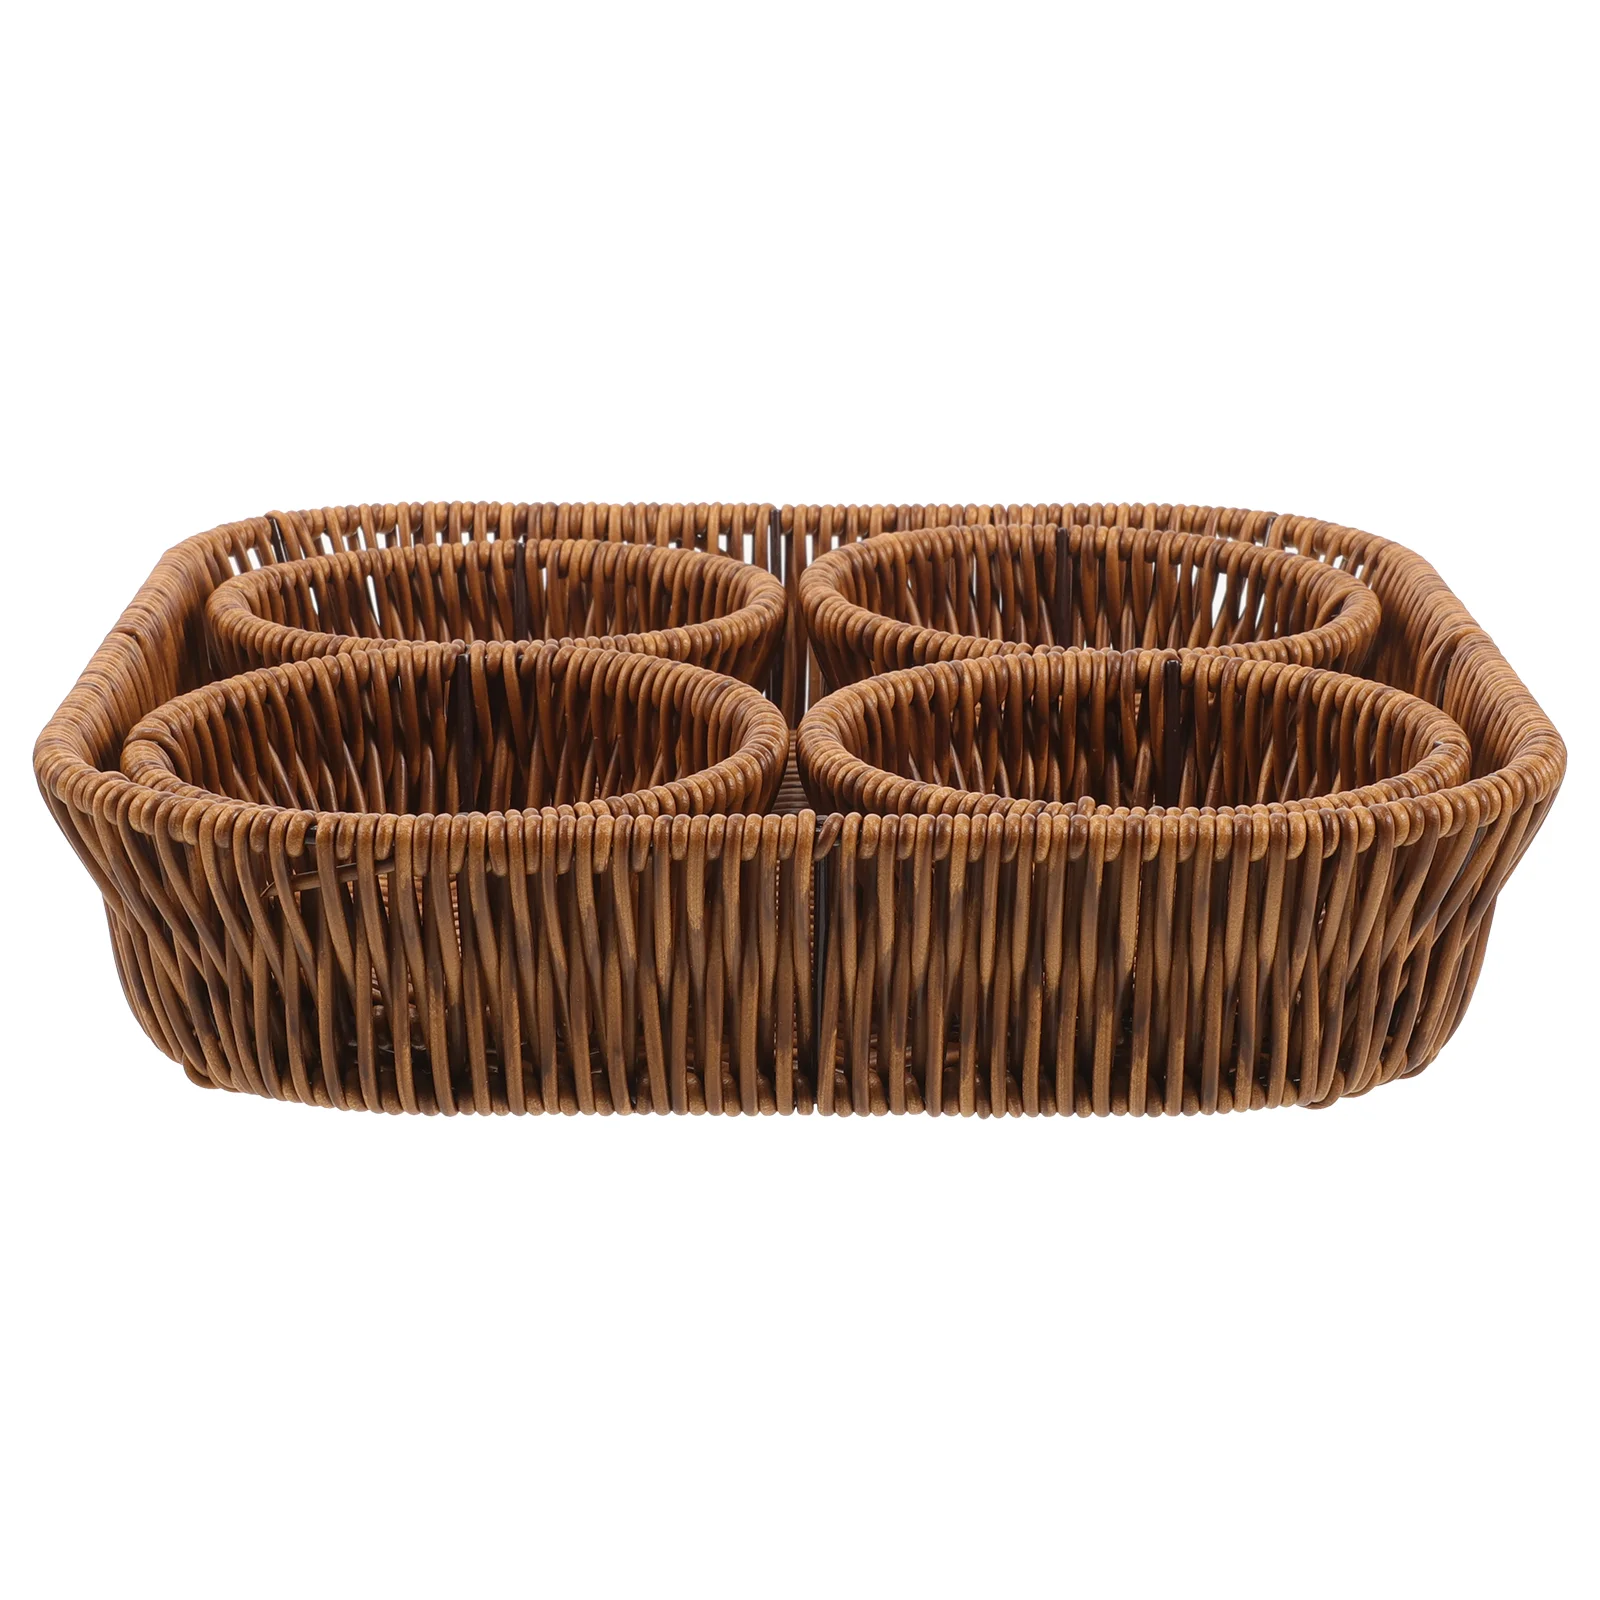 

Rattan Storage Basket Large Snack Baskets Compartments Small Round Woven Dried Fruit